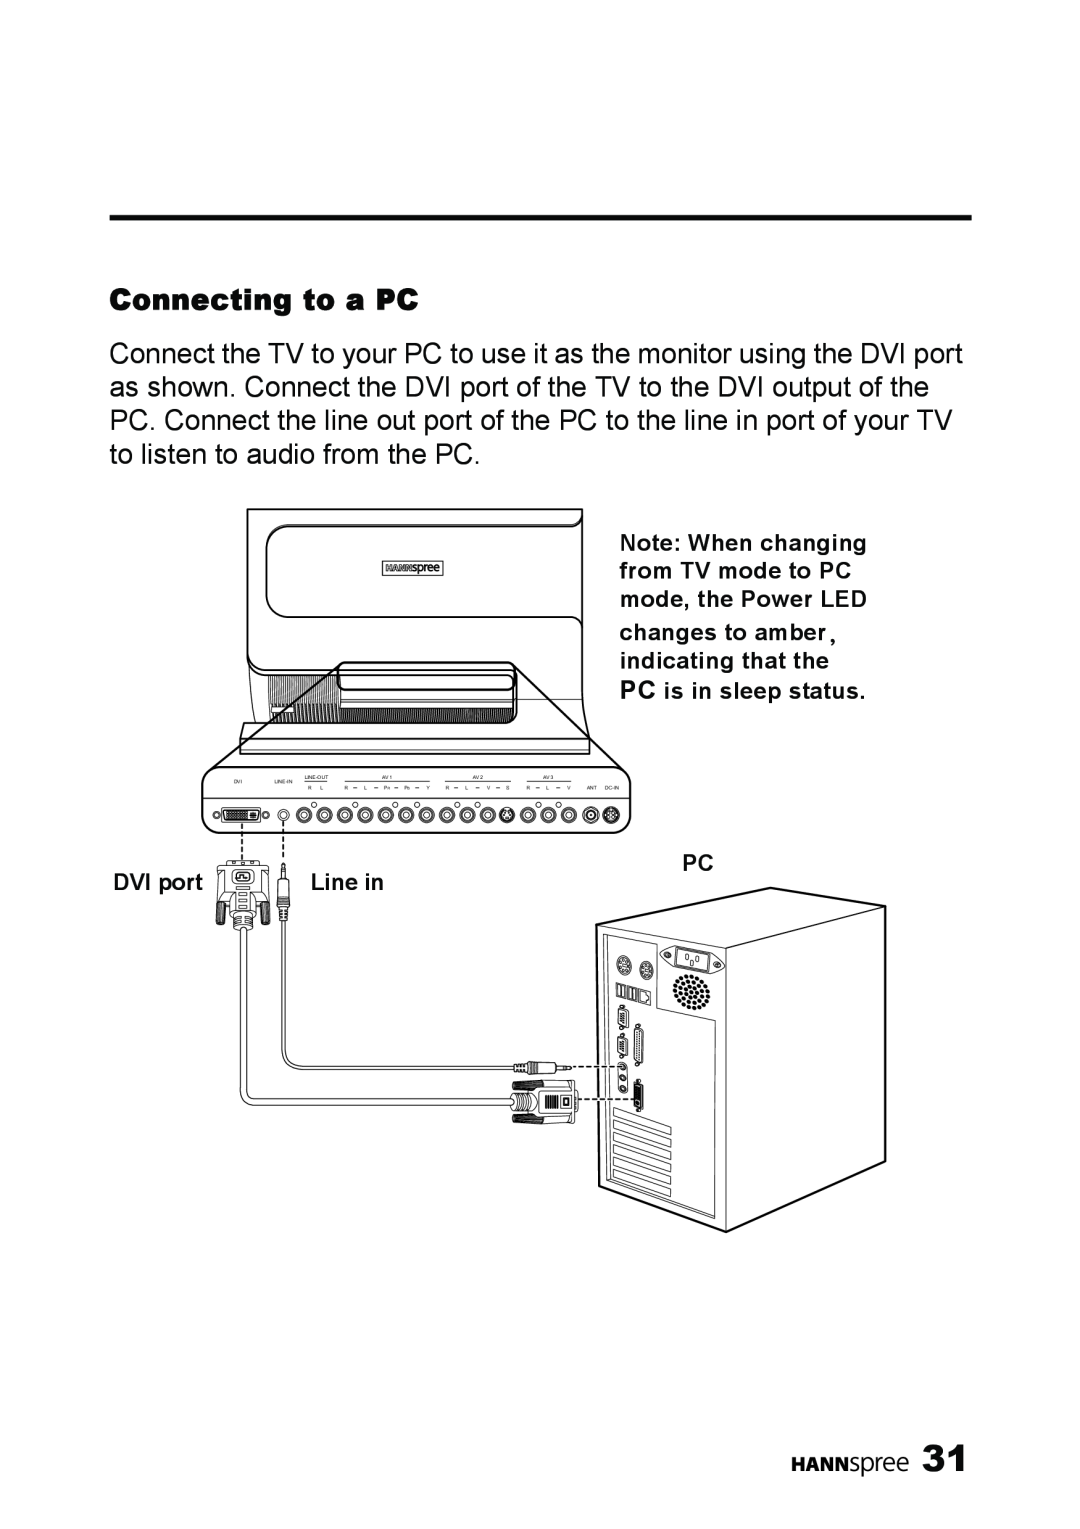 HANNspree LT11-23A1 Connecting to a PC, Note When changing from TV mode to PC mode, the Power LED, DVI port, Line in 